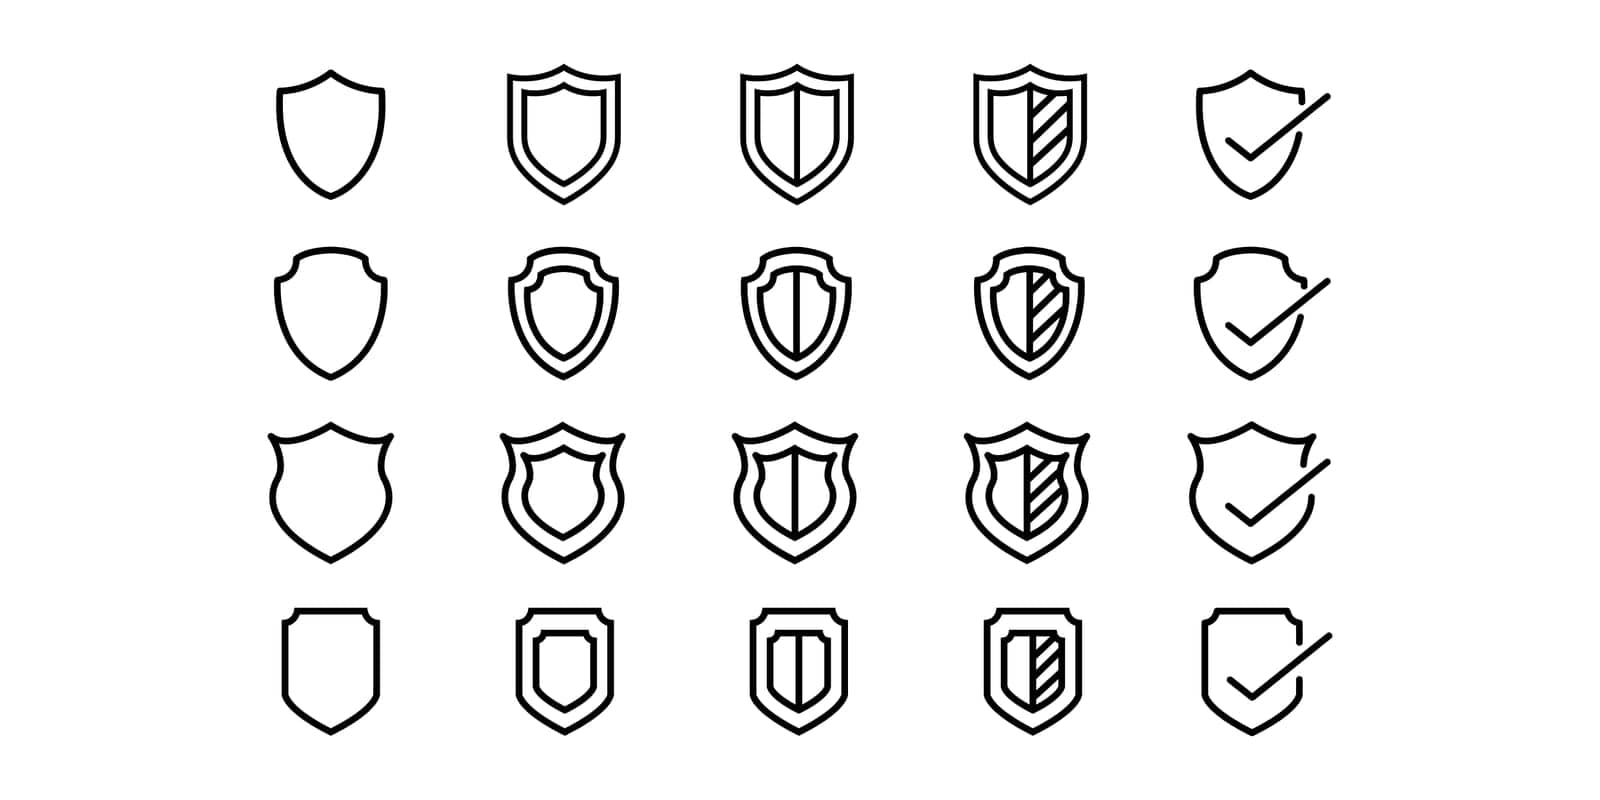 Badge collection, design element, frequently used in making design.